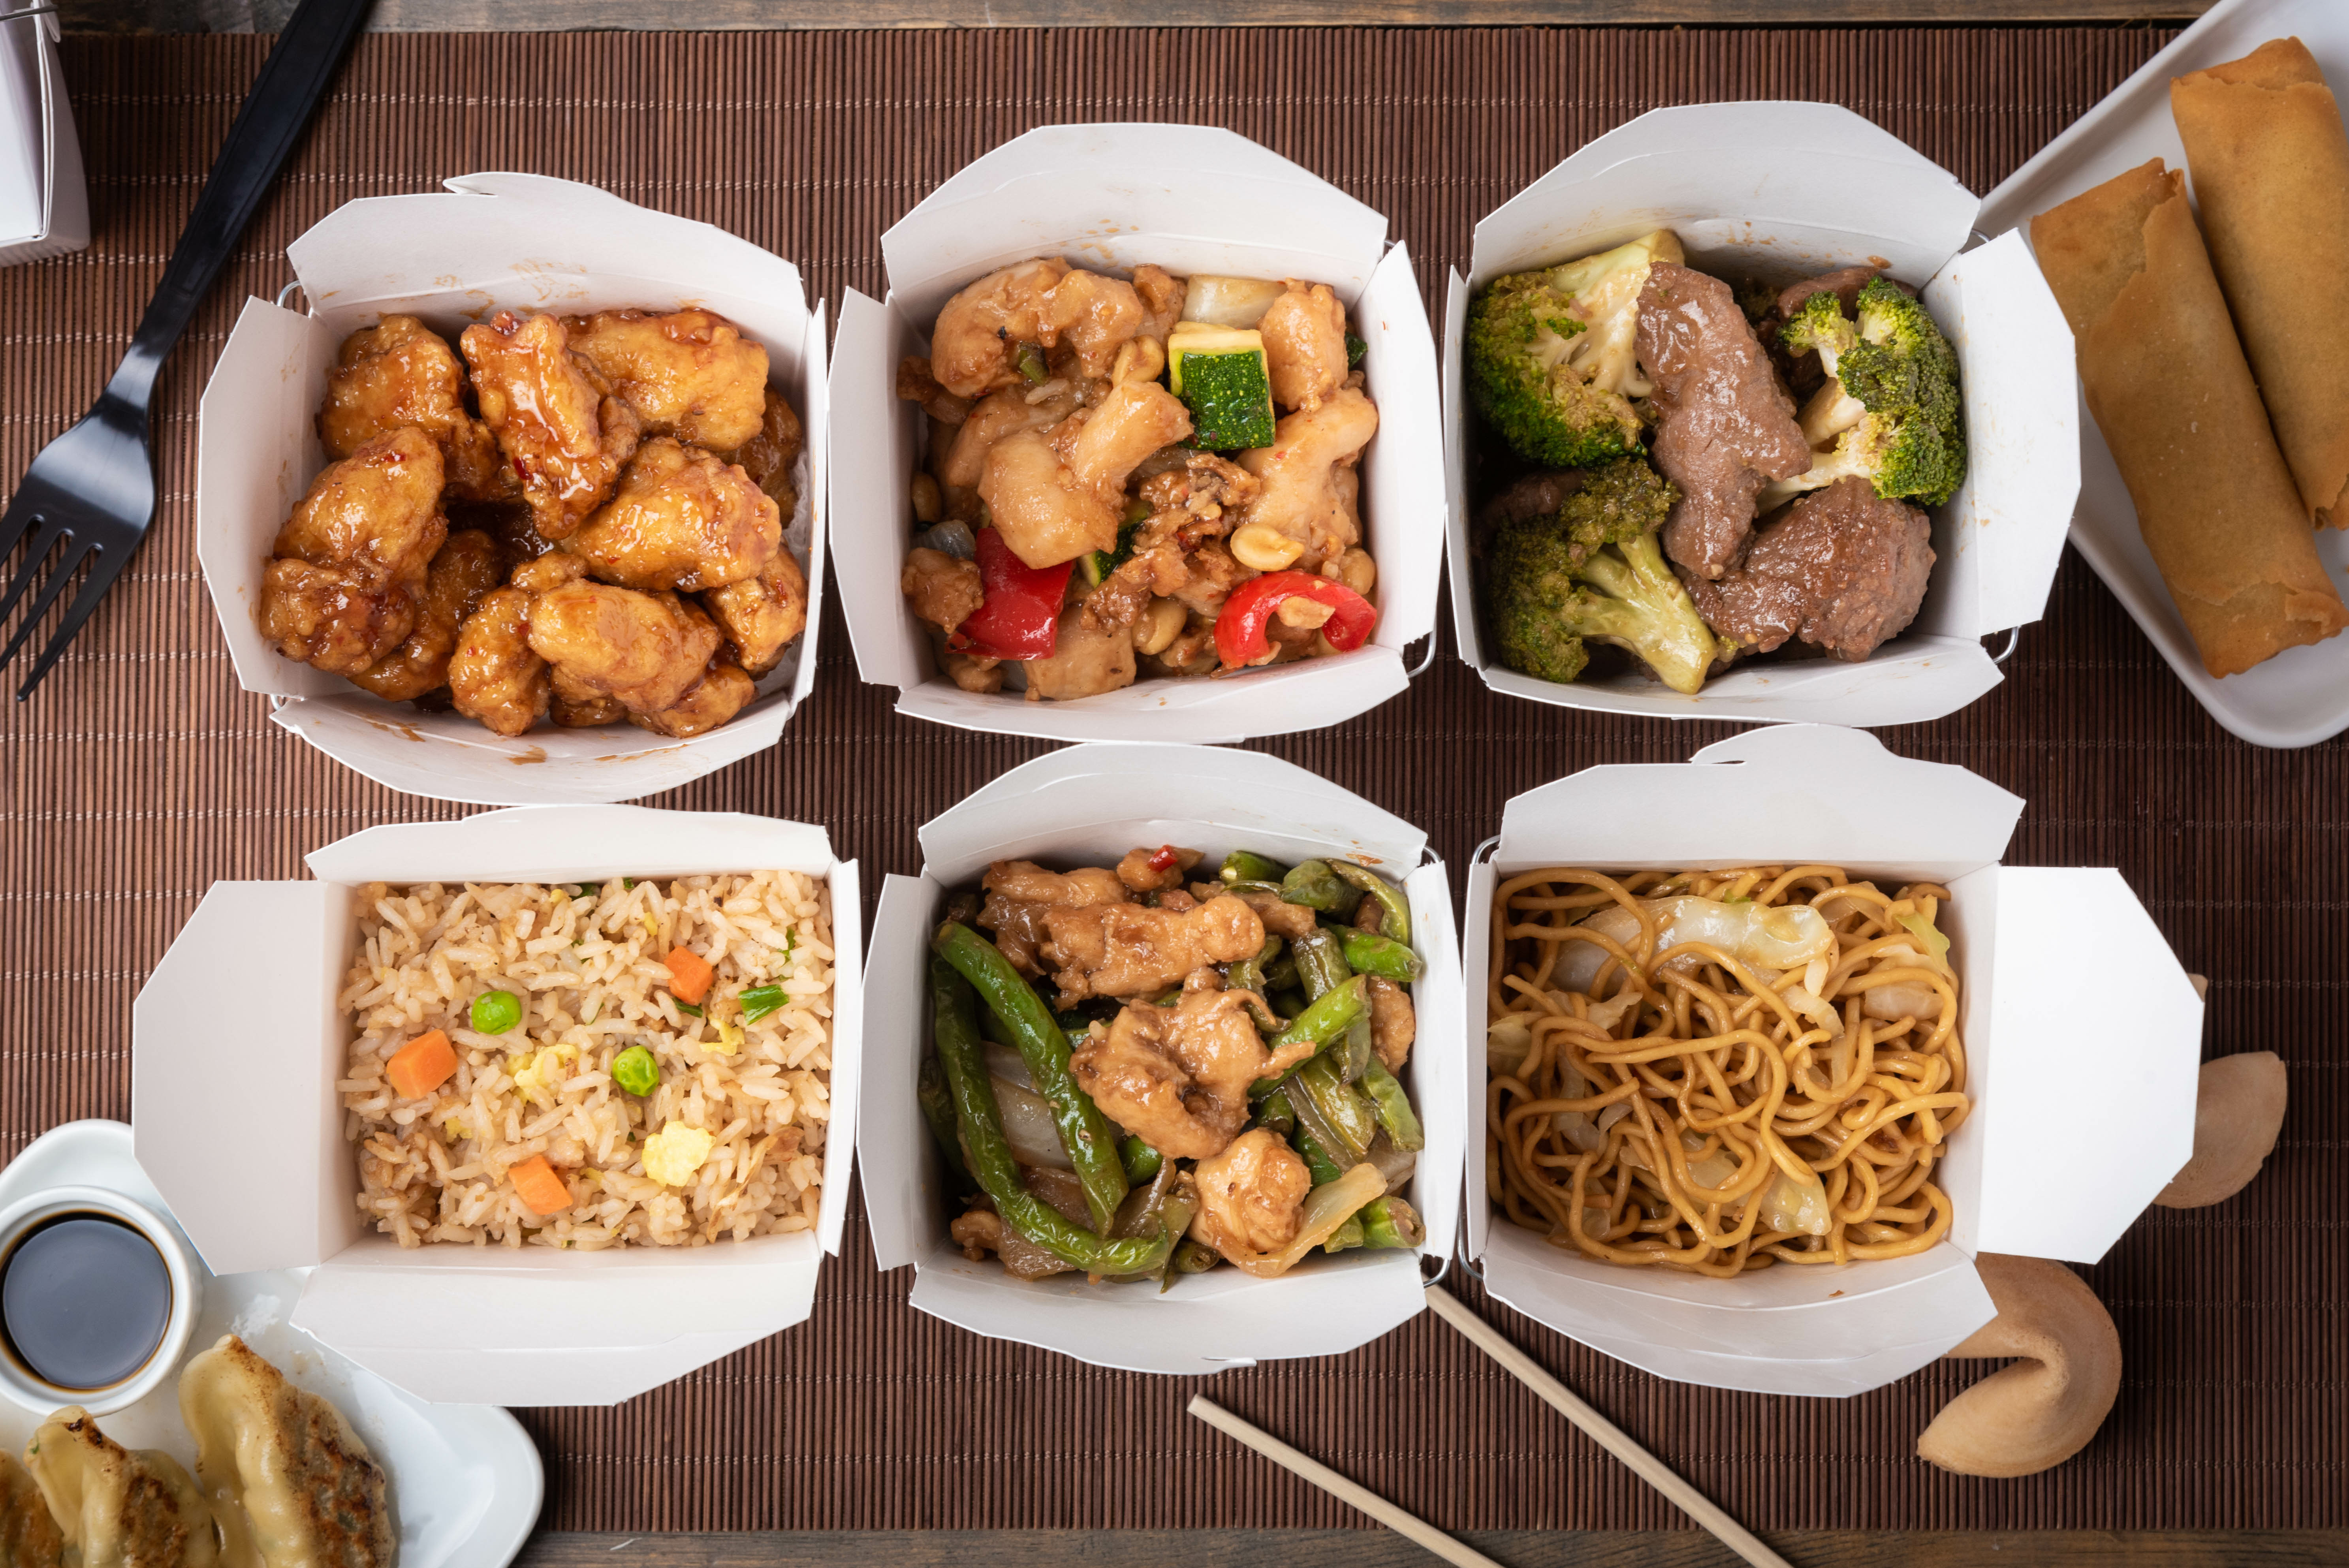 Chinese food in delivery containers